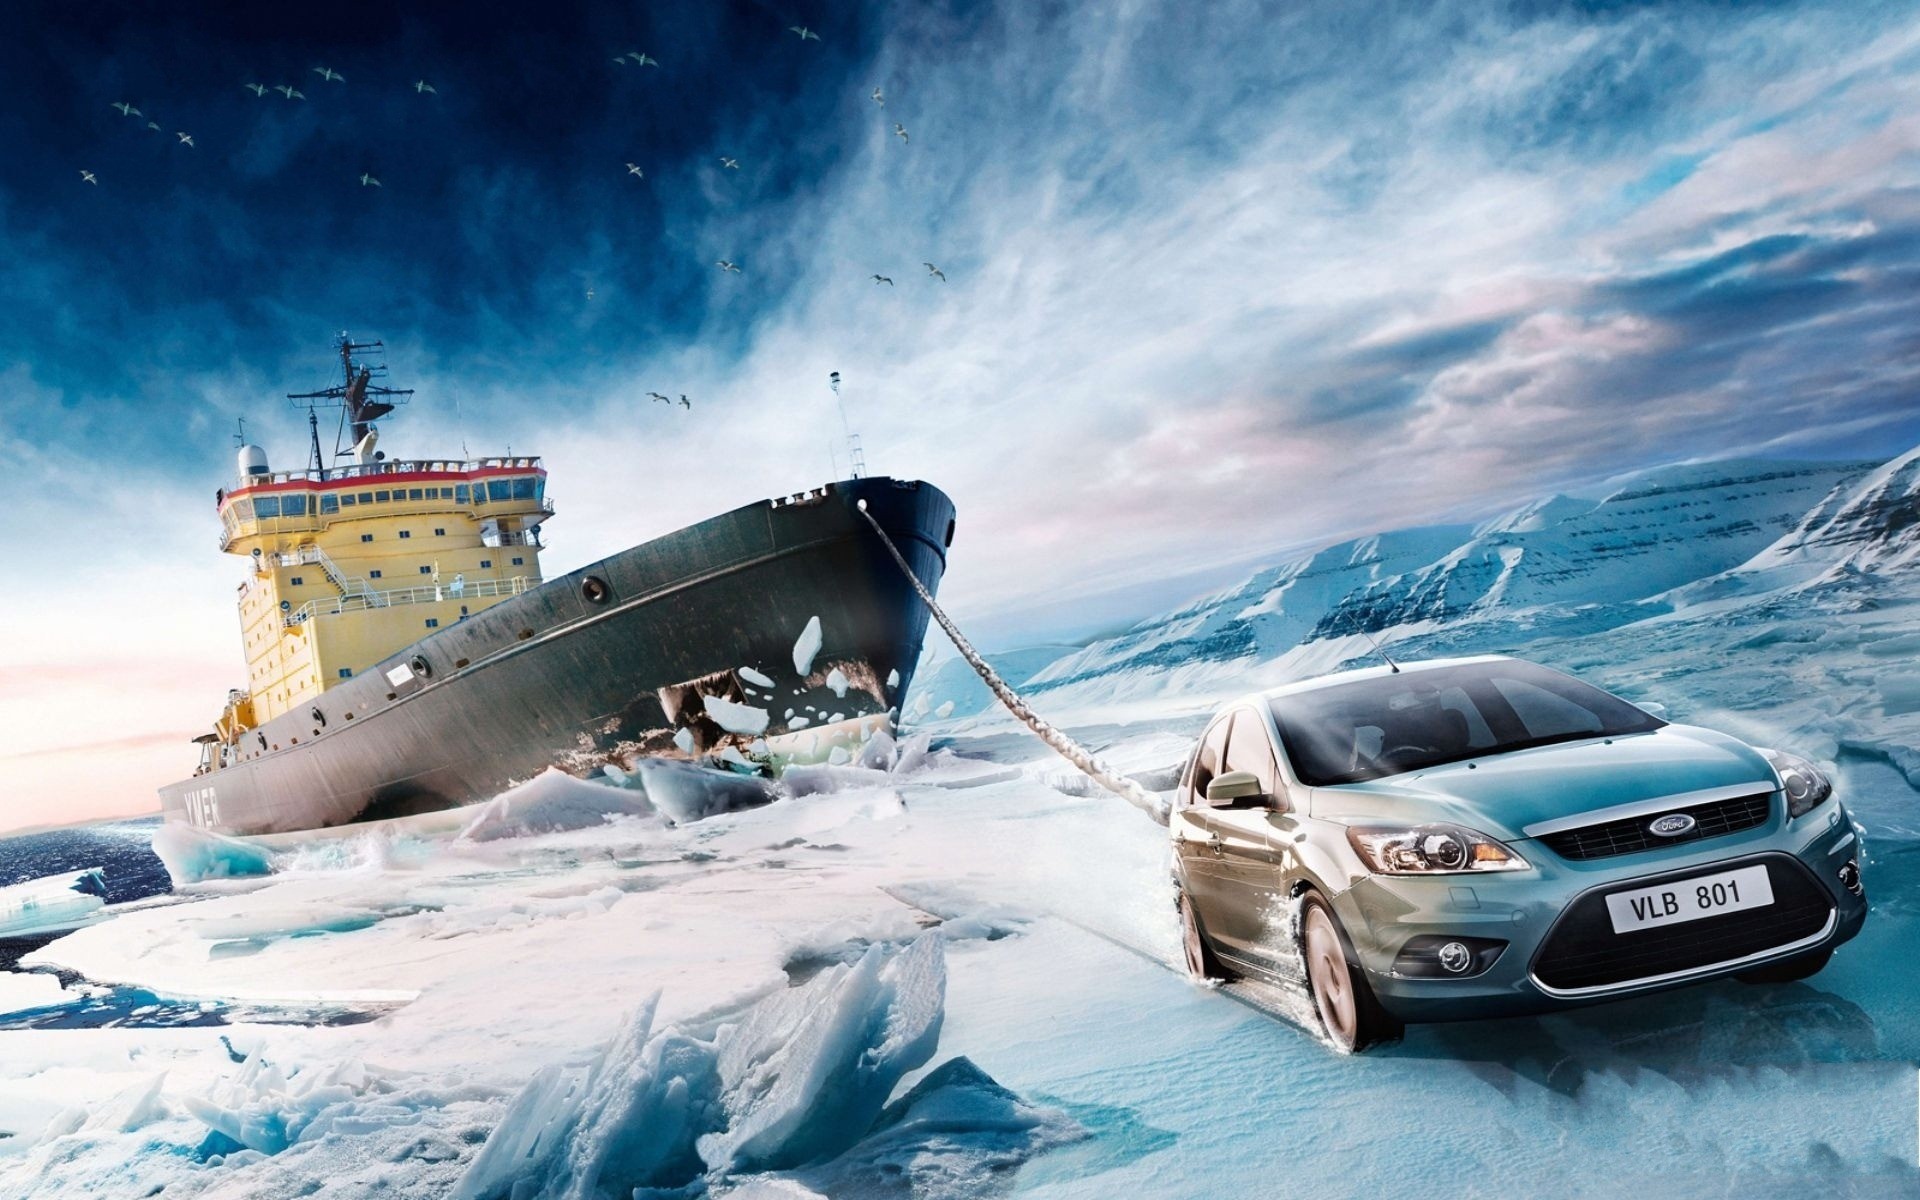 vehicle, Car, Ford, Ford focus, Ship, Iceberg, Ropes, Sea, Winter, Snow, Photo manipulation, Commercial, Icebreakers Wallpaper